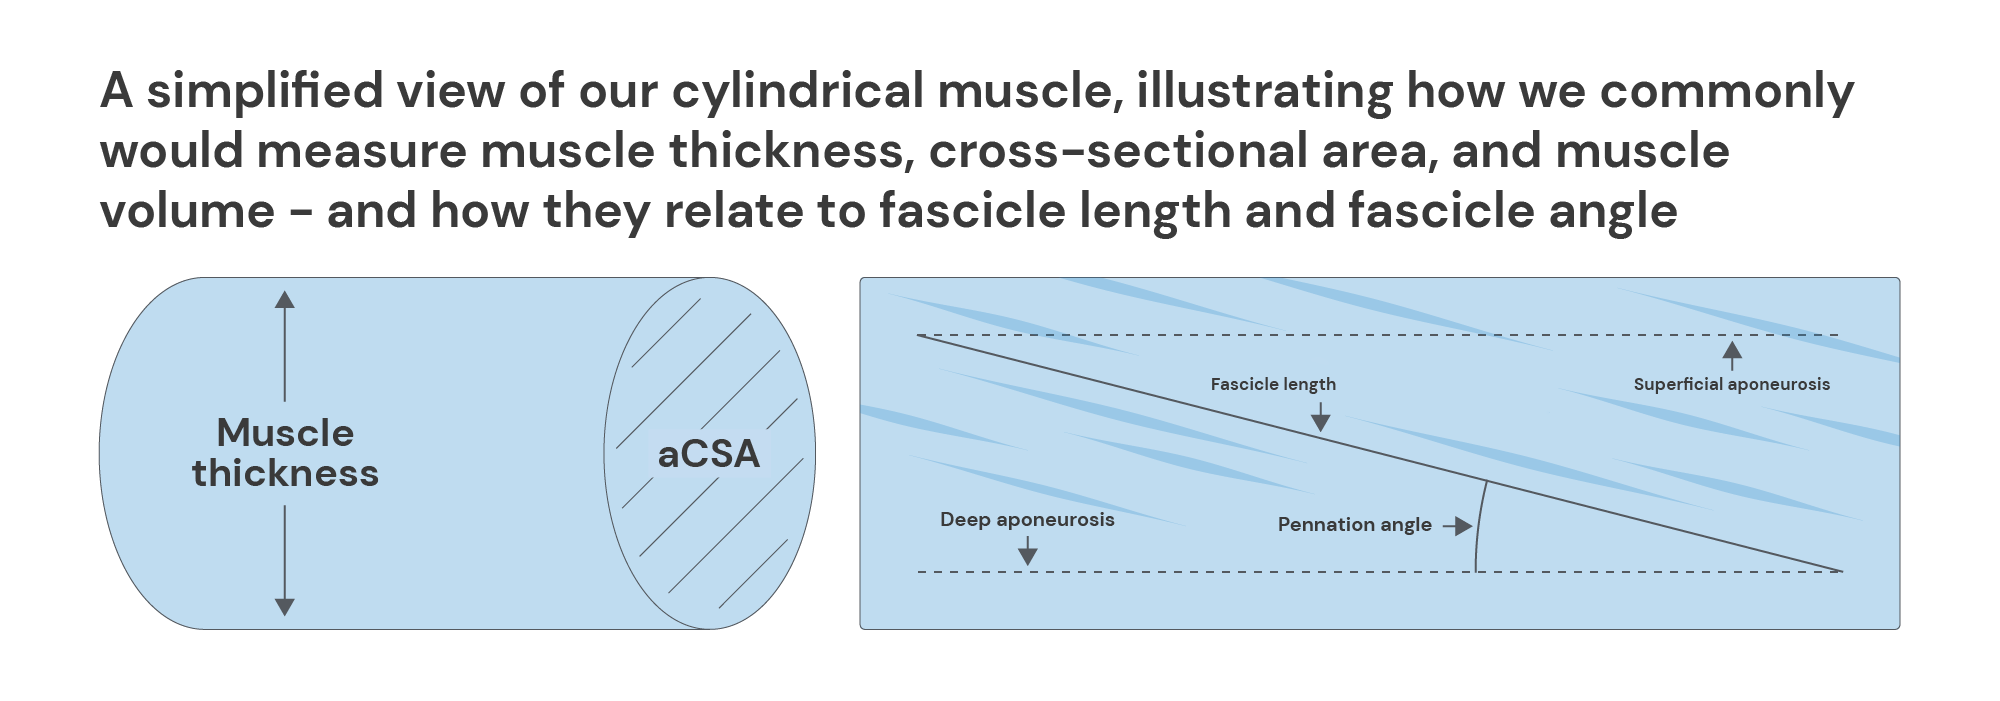 A simplified view of cylindrical muscle